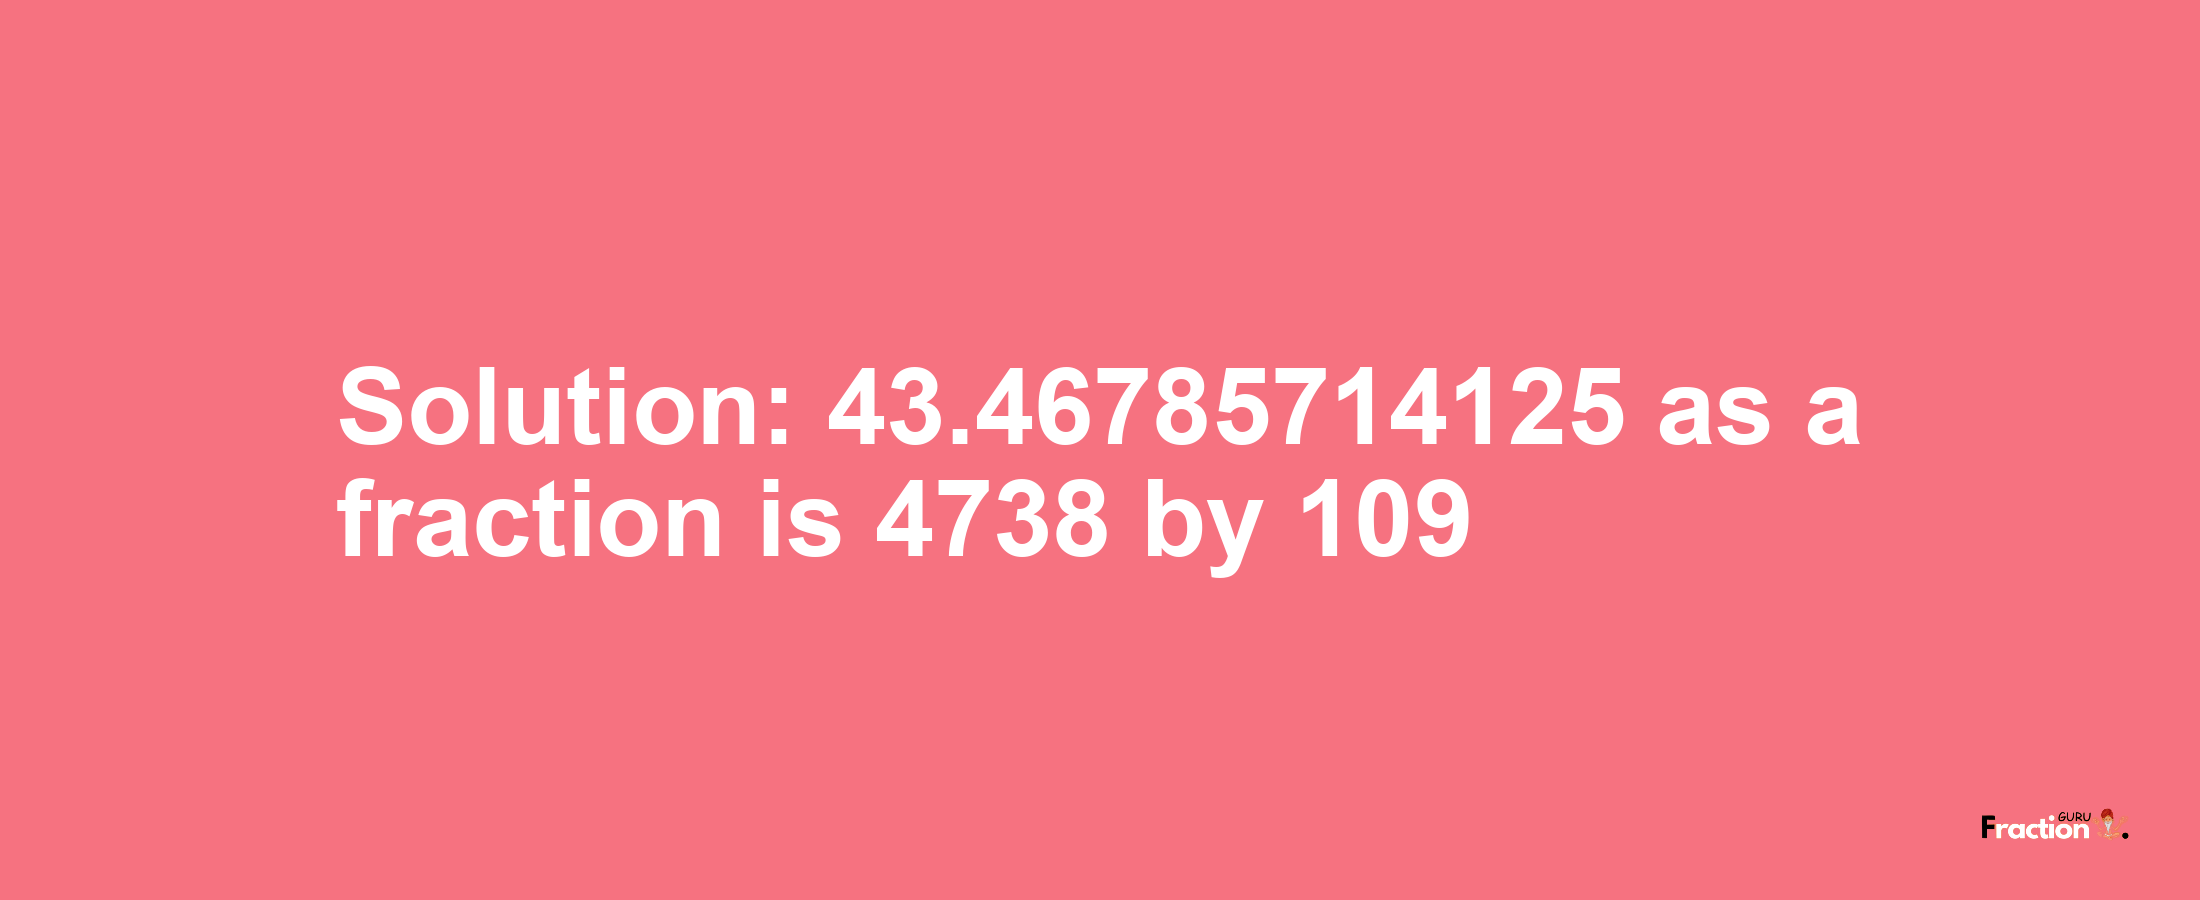 Solution:43.46785714125 as a fraction is 4738/109